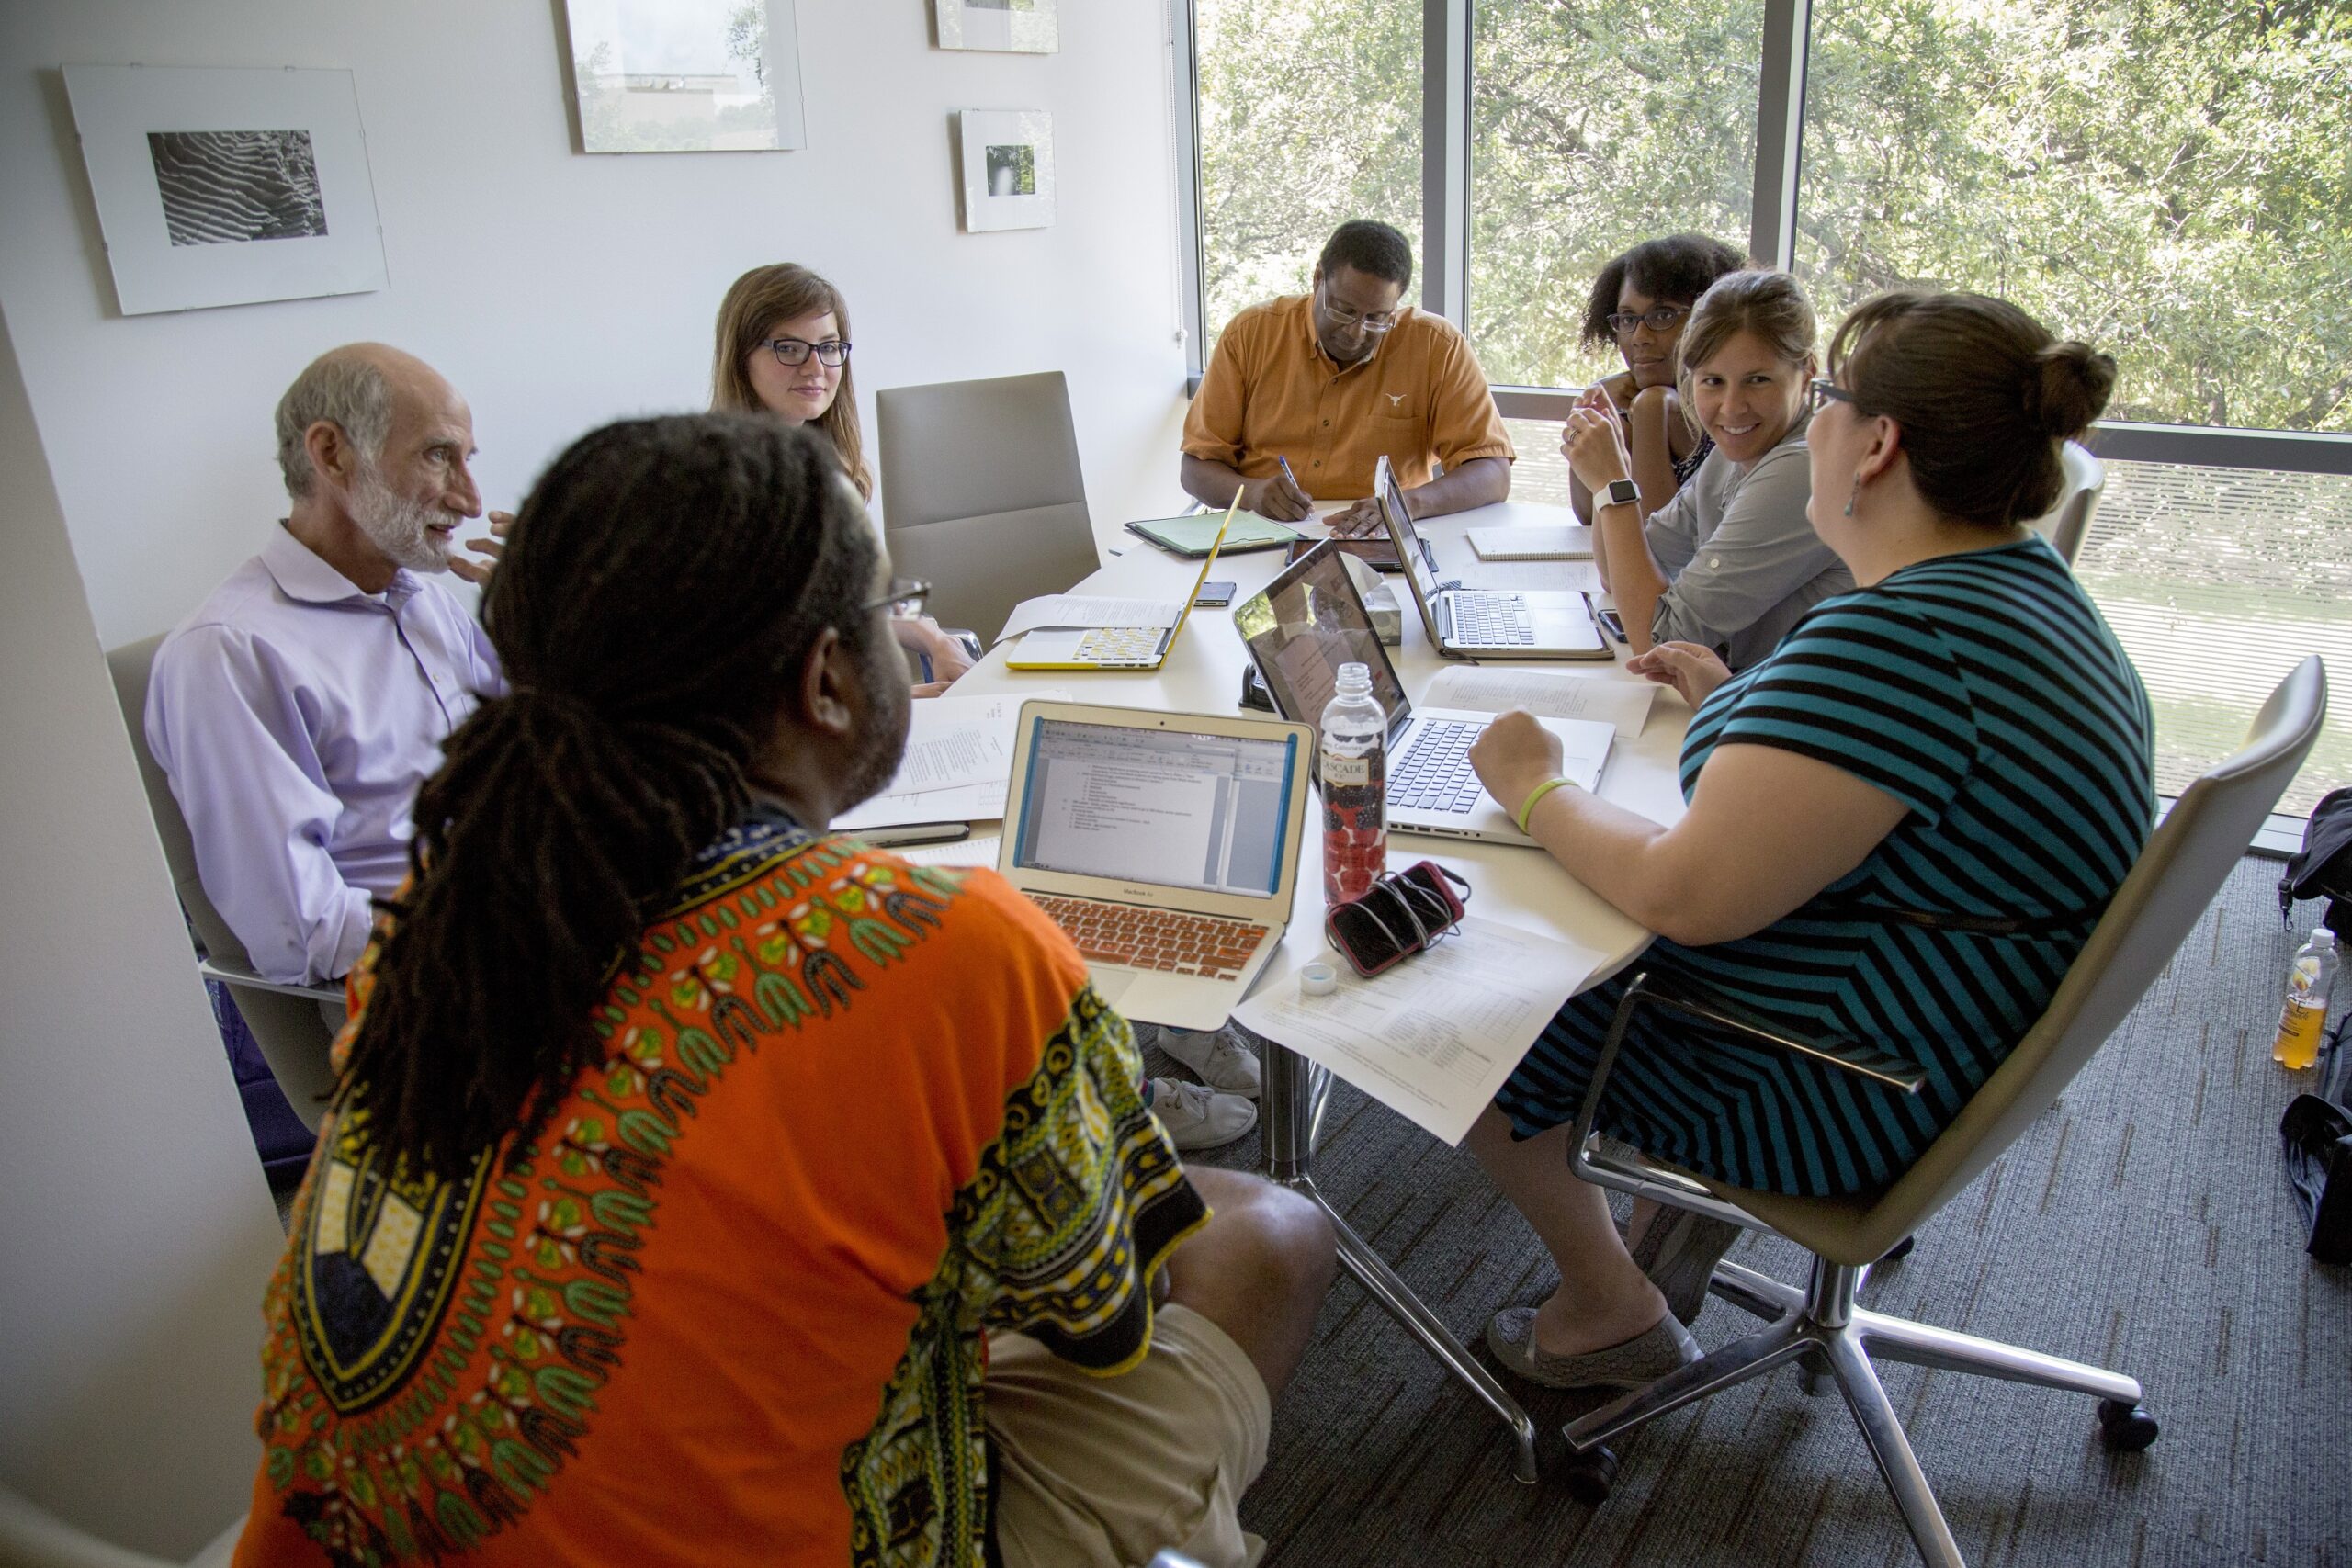 Group of faculty in an office discussion around a table